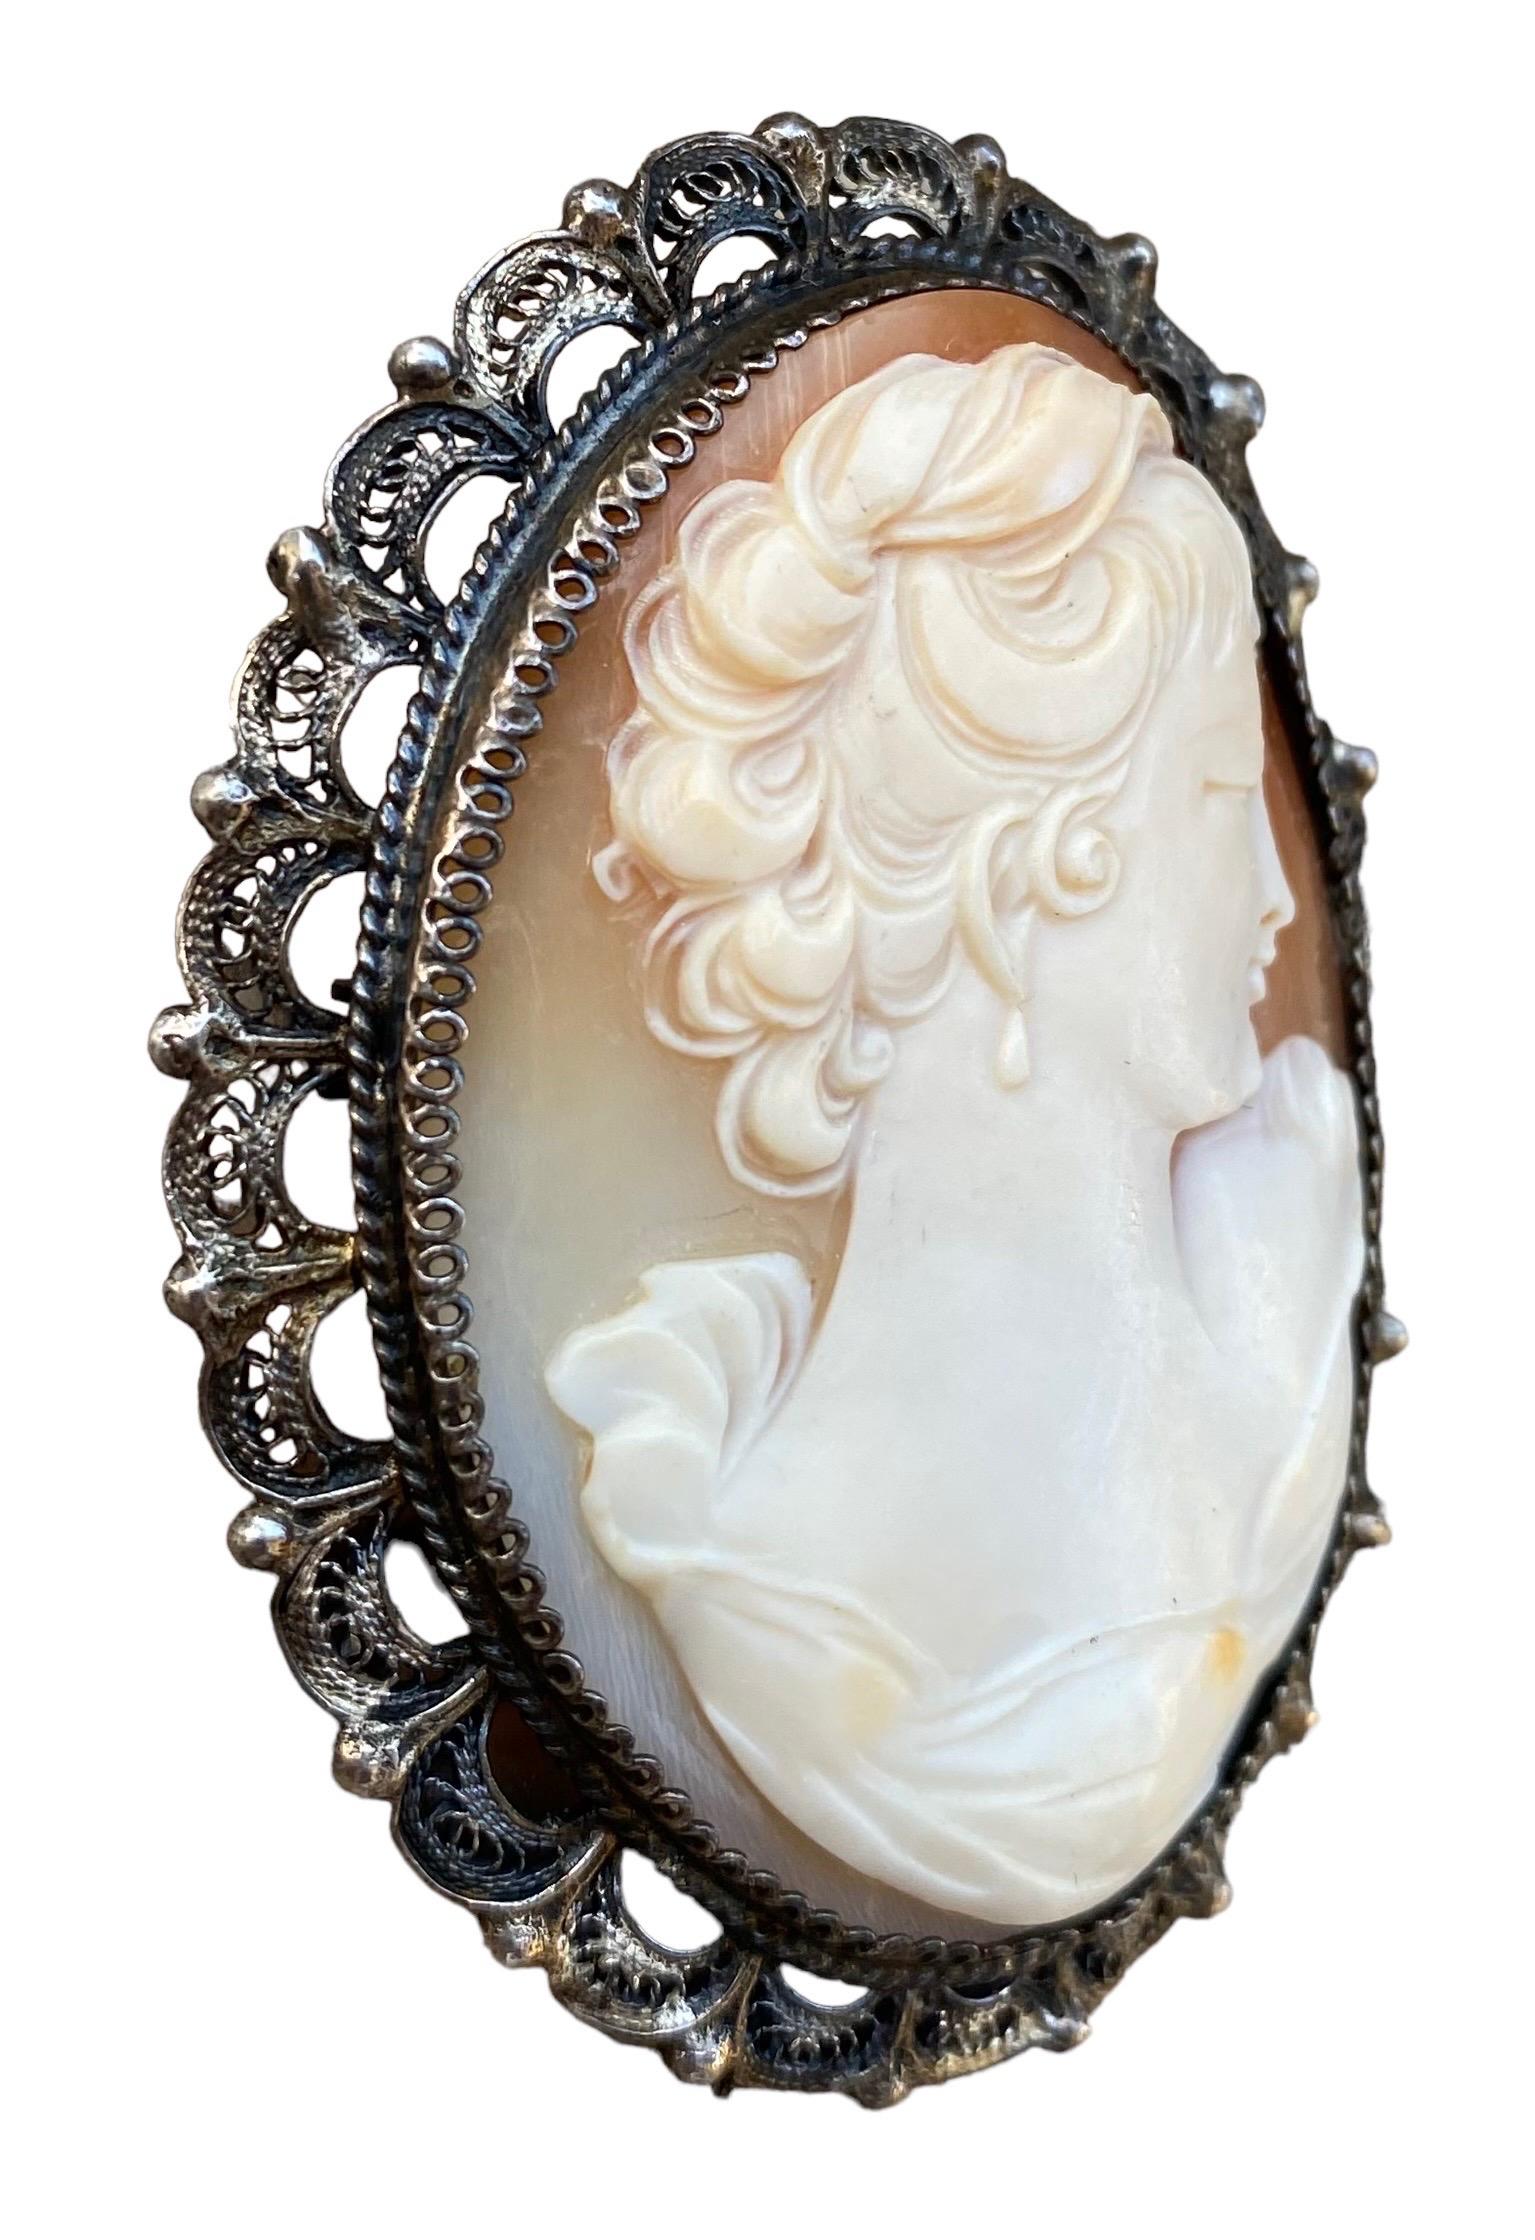 Hand-Carved Antique 19th C. Italian Cameo in Silver Filagree Setting